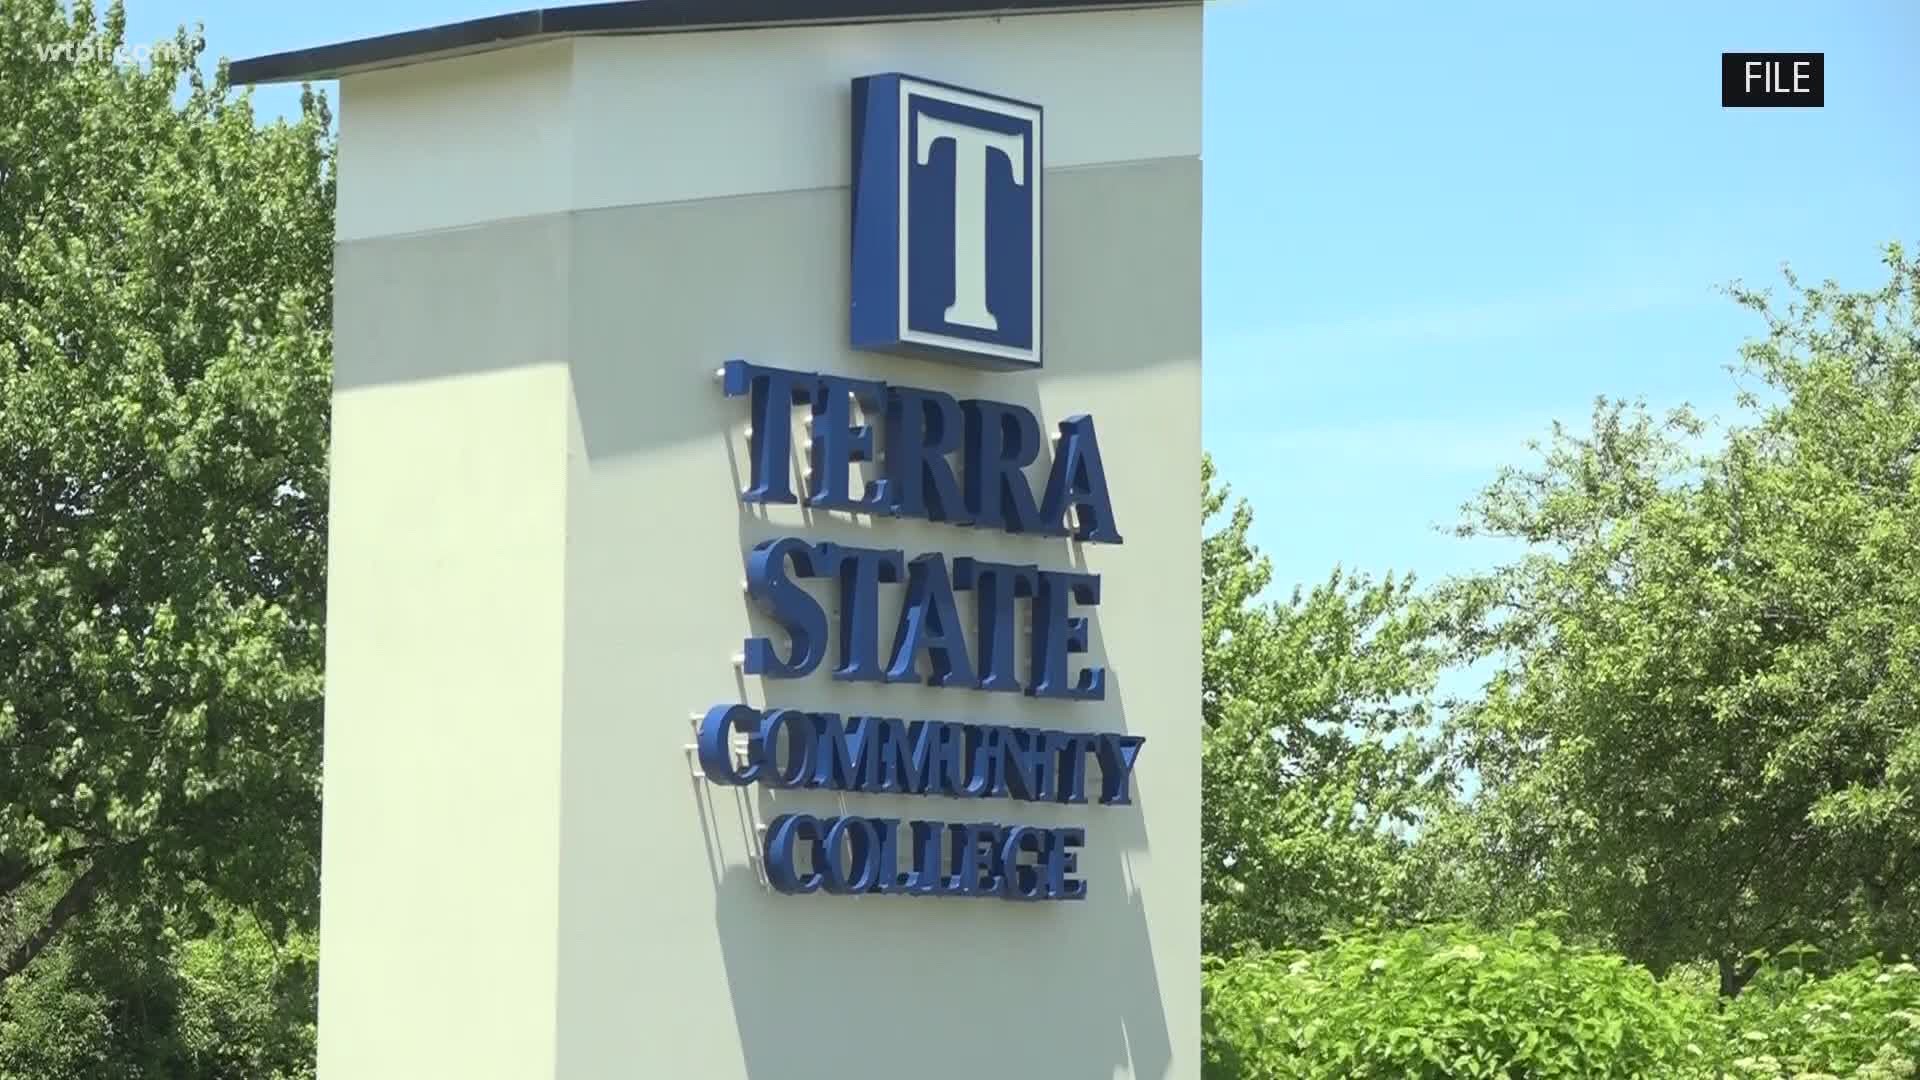 NW Ohio community college leaders believe a year or two at a community college would be a better fit for students and families during these turbulent times.